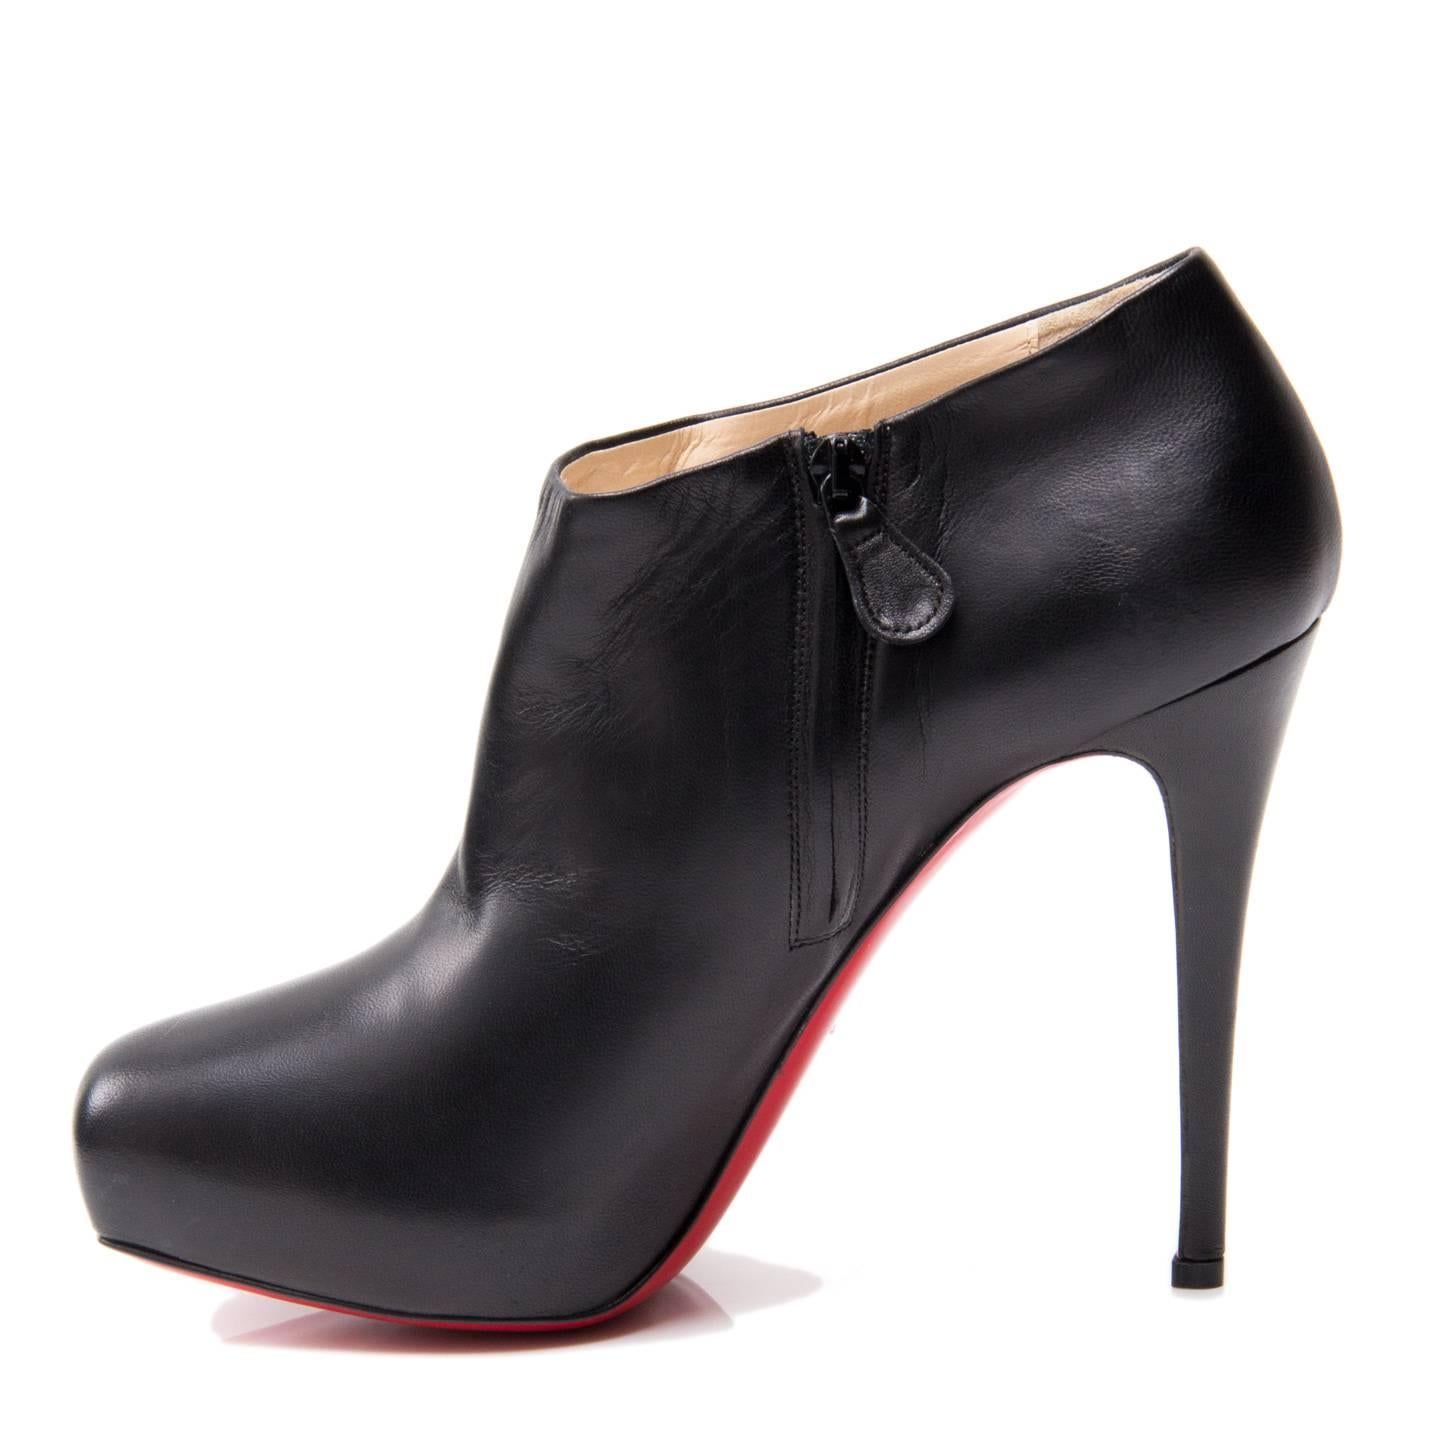 Women's Christian Louboutin Black Leather Ankle Boots